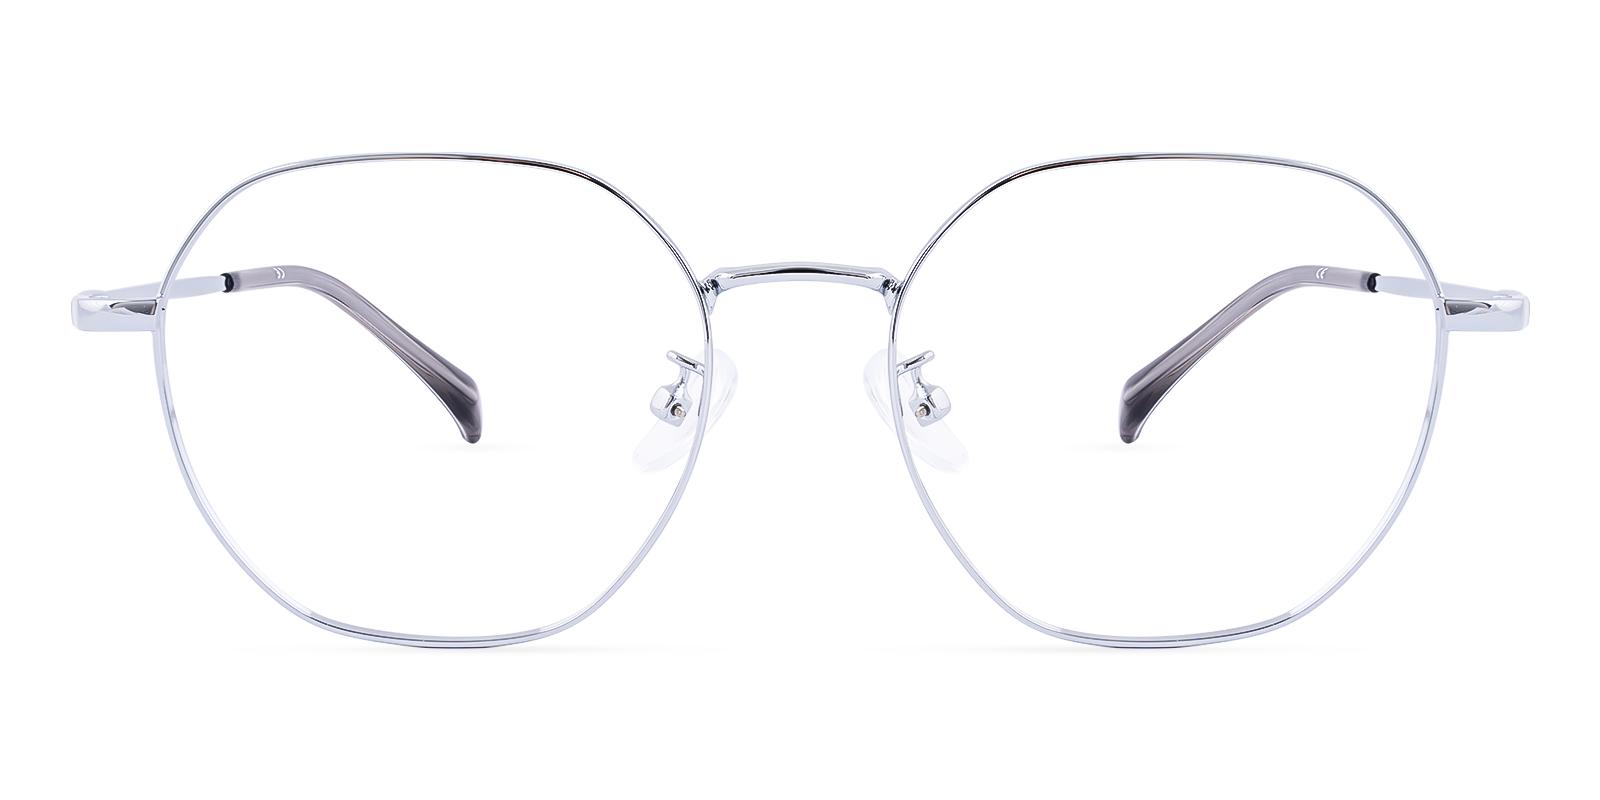 Laylike Silver Metal Eyeglasses , NosePads Frames from ABBE Glasses